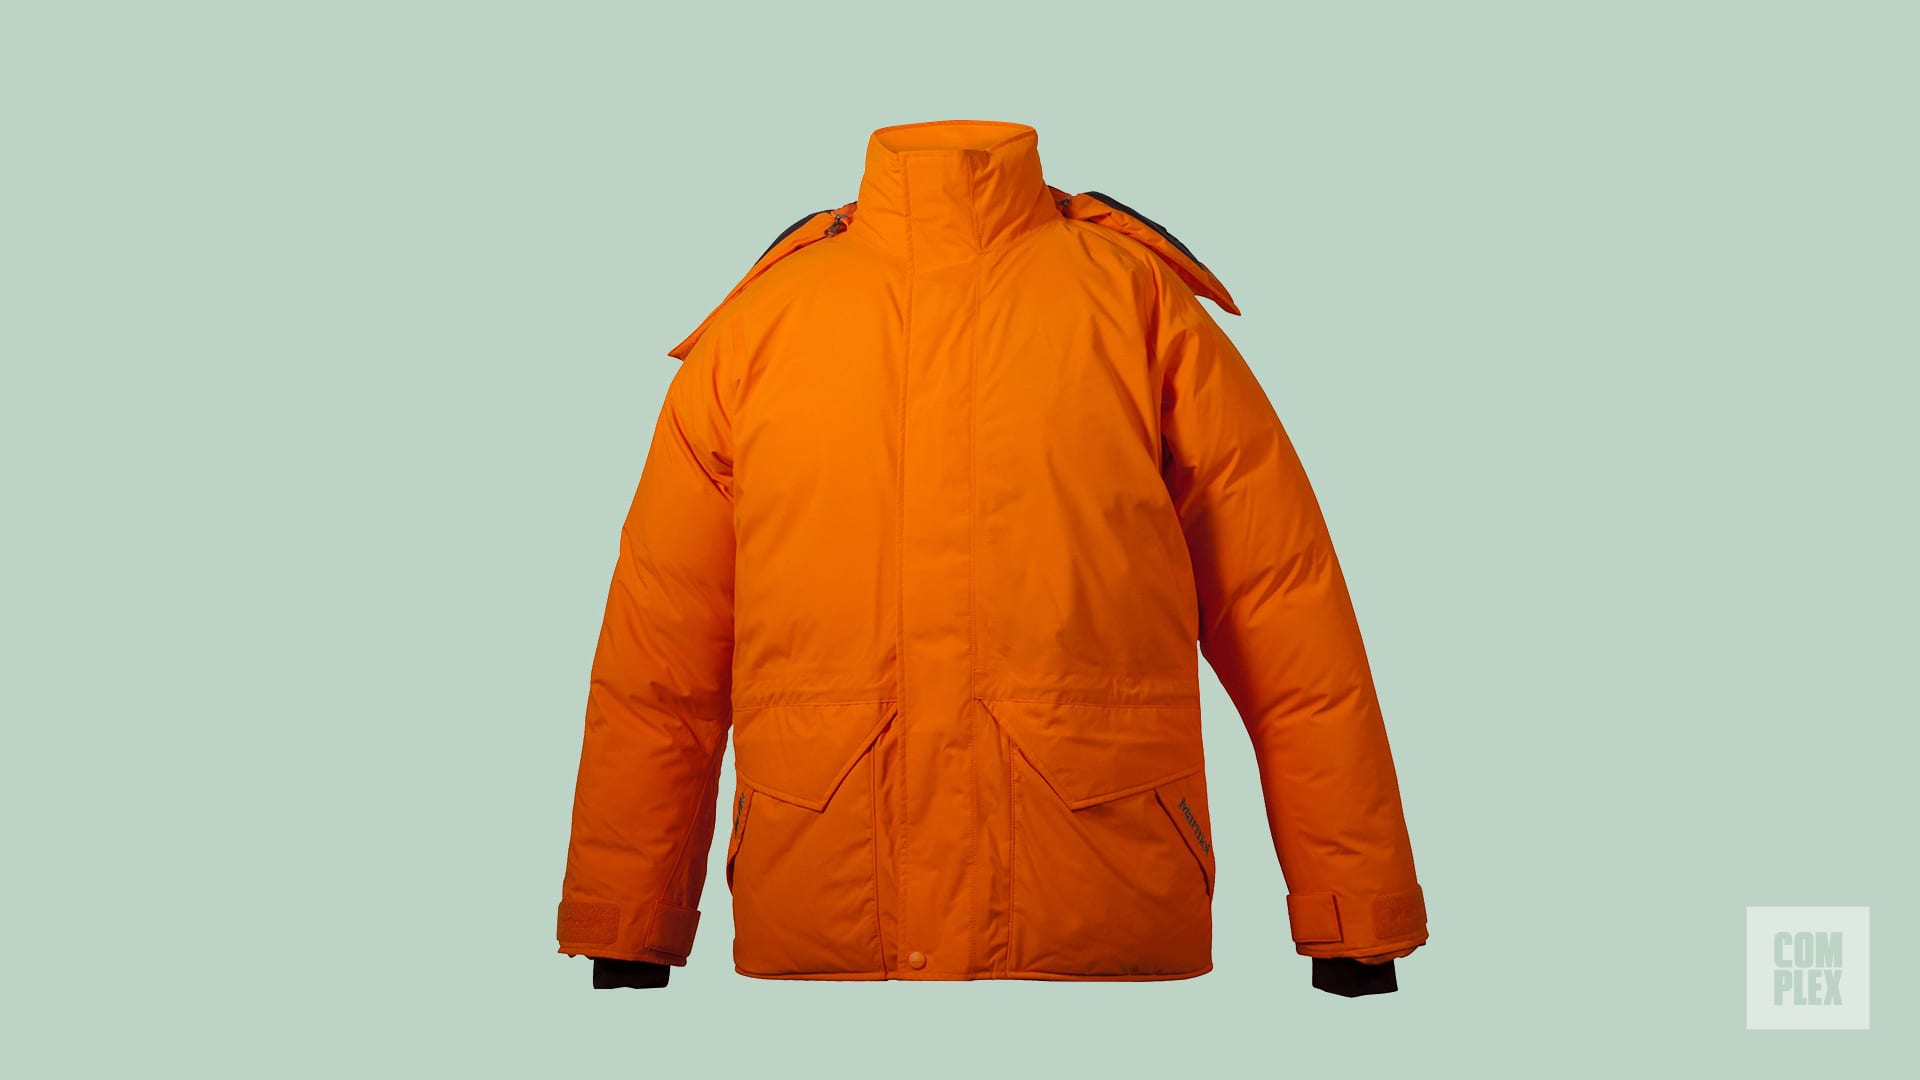 Best NYC Jackets and Outerwear Guide The Marmot Mammoth Parka or Biggie